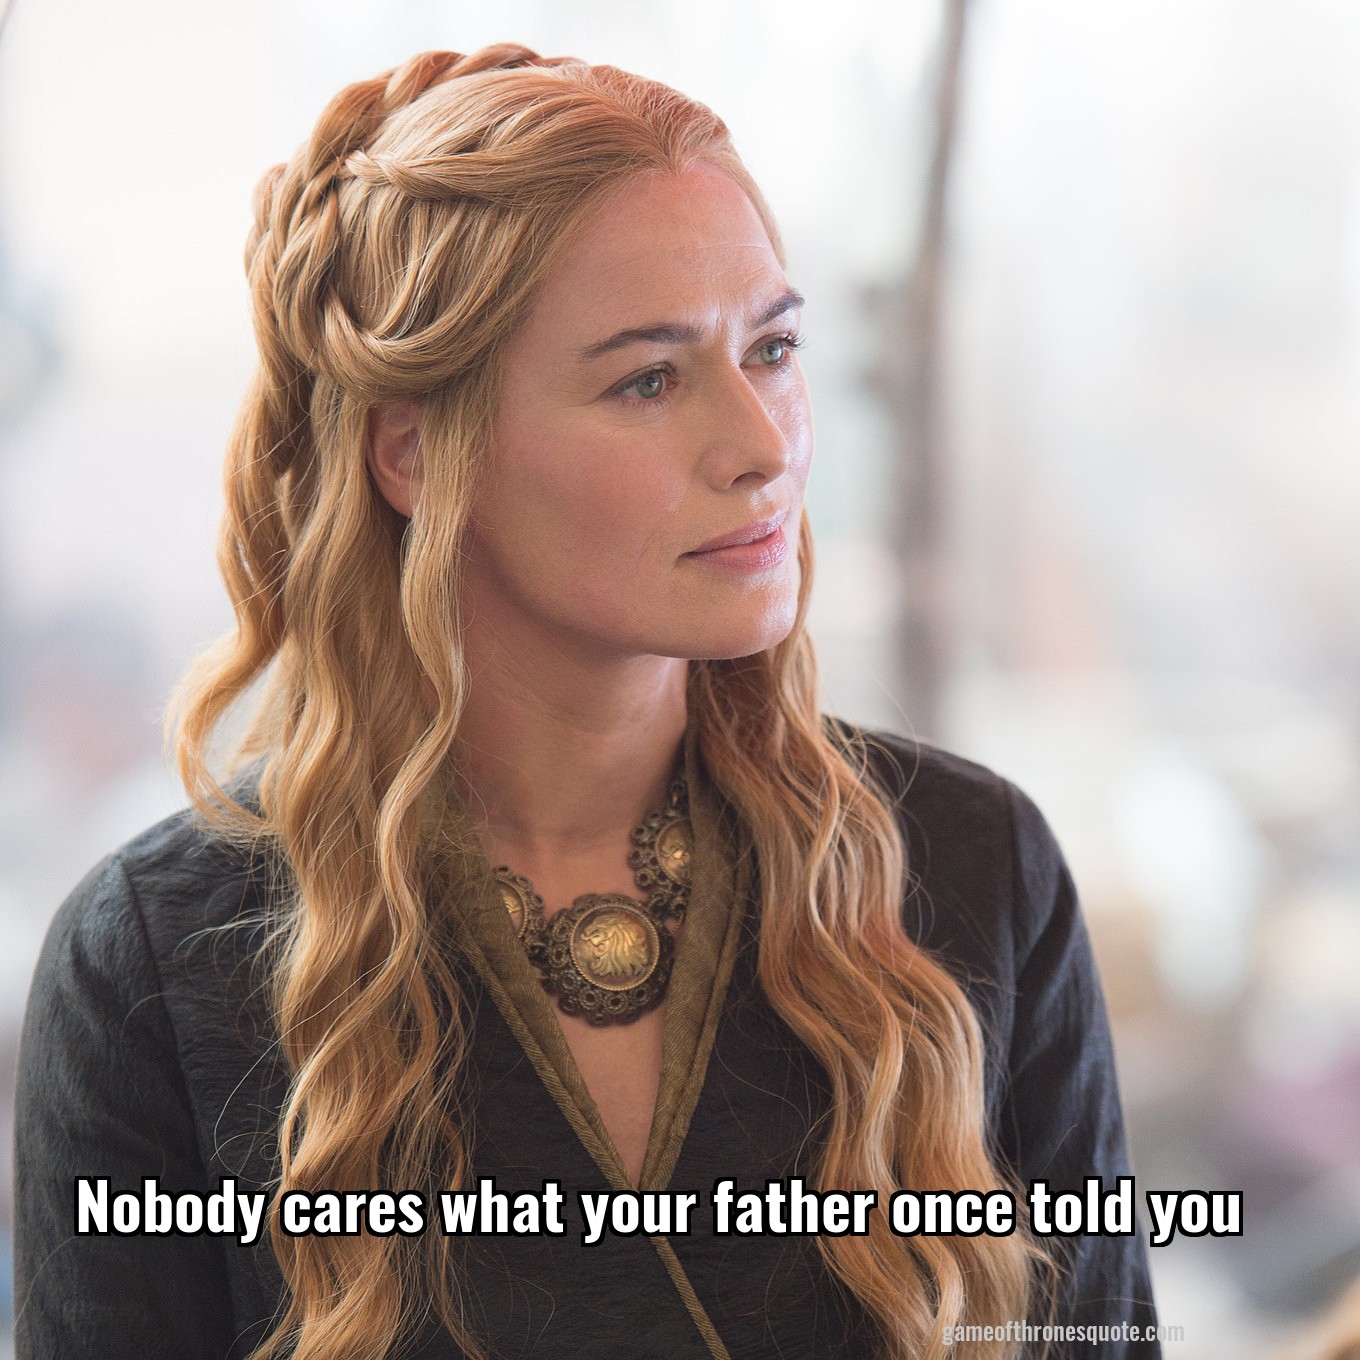 Nobody cares what your father once told you